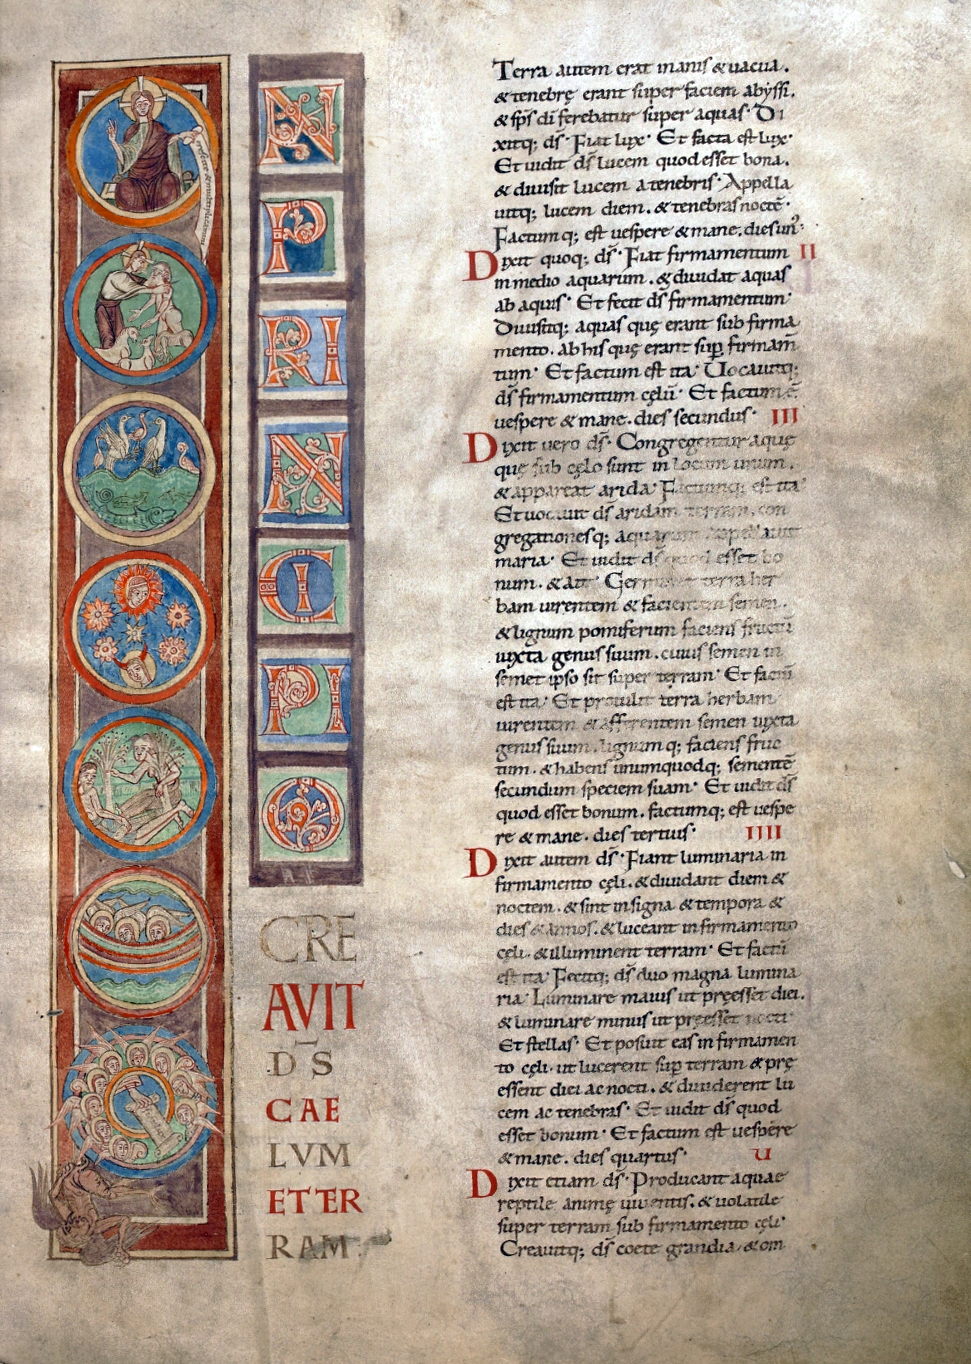 1084 Bible of Lobbes, Abbey St. Peter of Lobbes (Flandres) Tournai, Bibliotheque du Seminaire, Ms. 1. fol 6